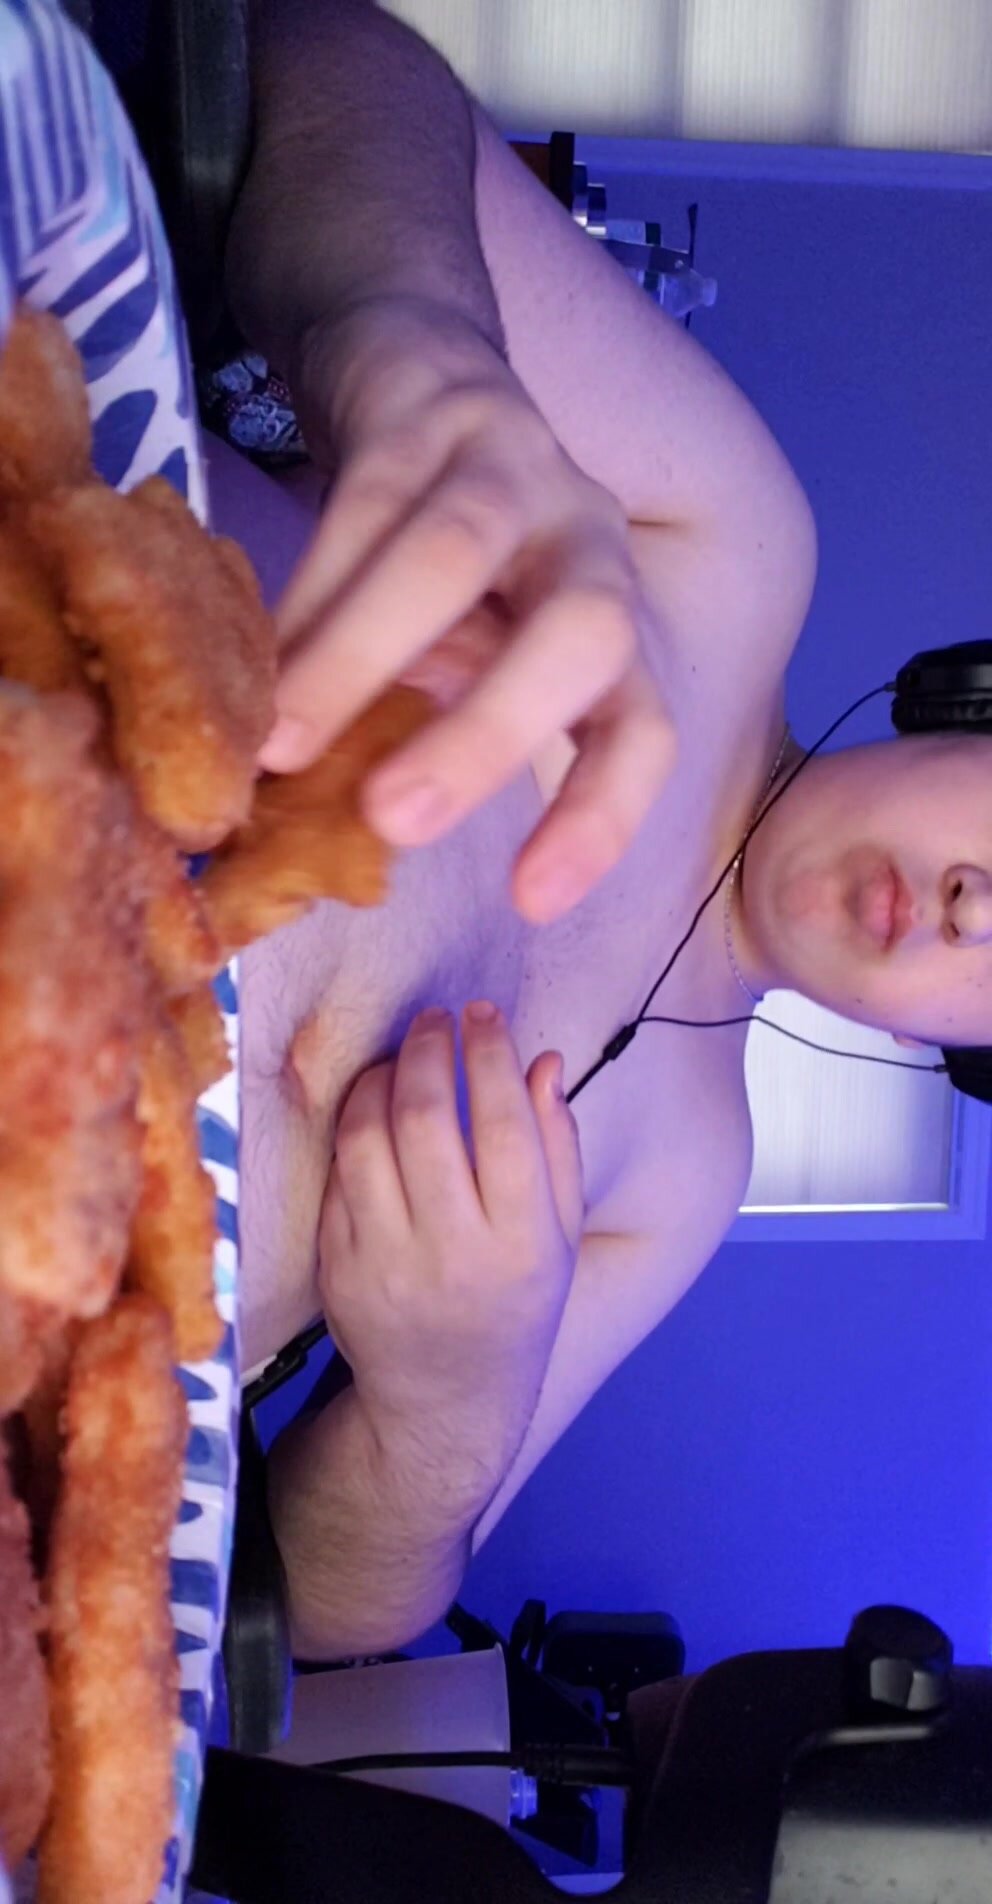 Fat pig eating chicken nuggets - ThisVid.com на русском